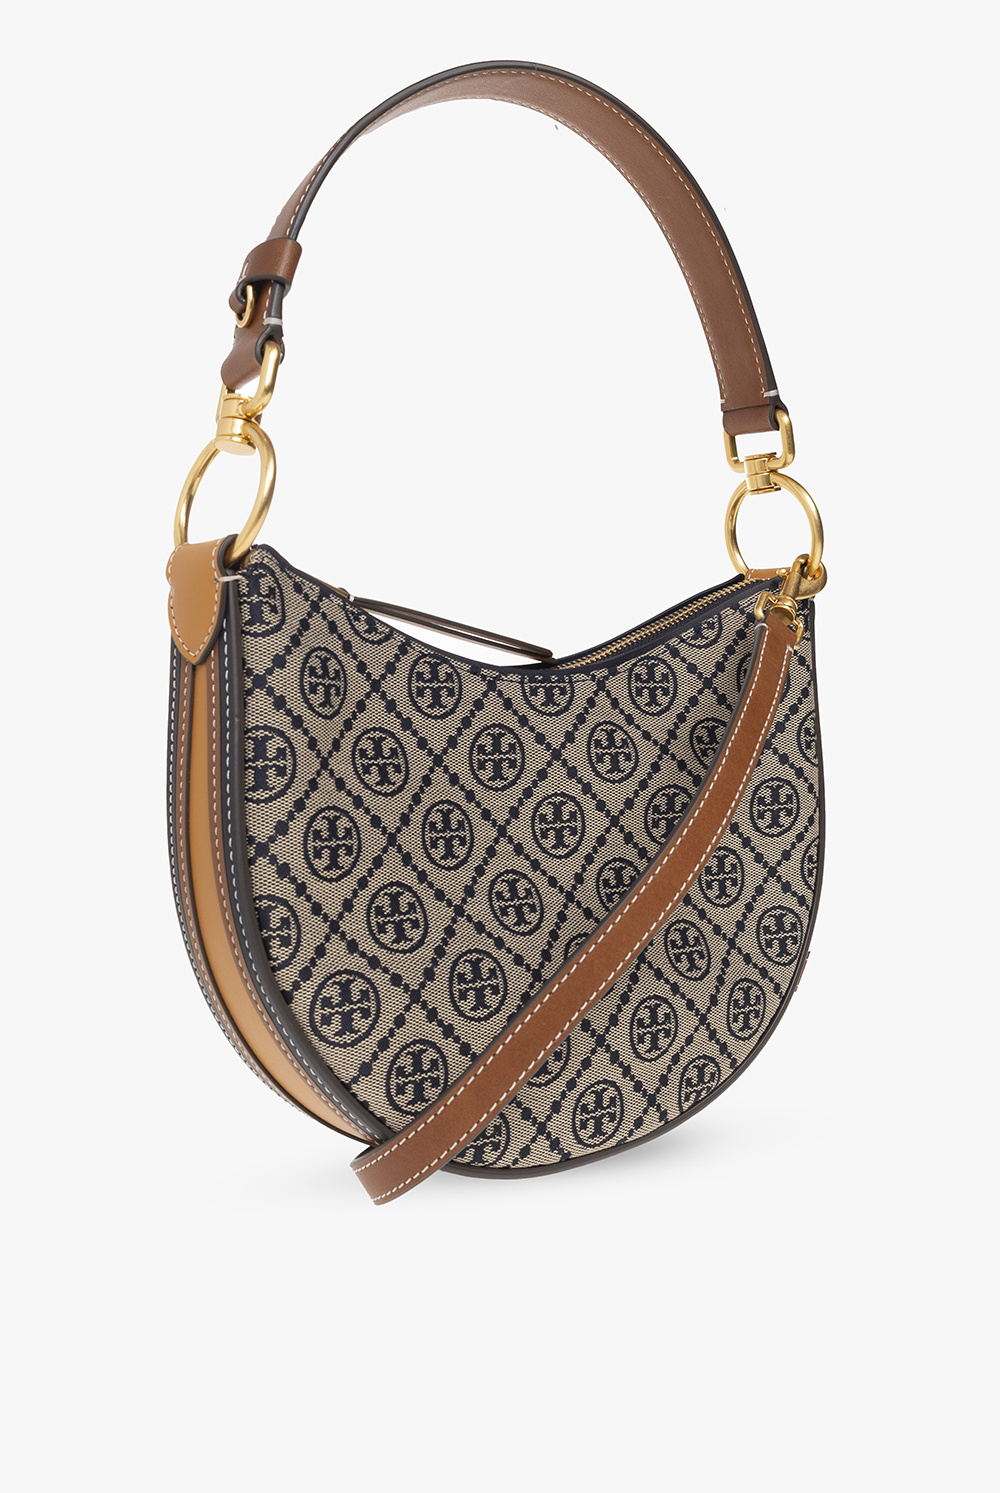 Tory Burch T Monogram Jacquard Small Tote in Blue